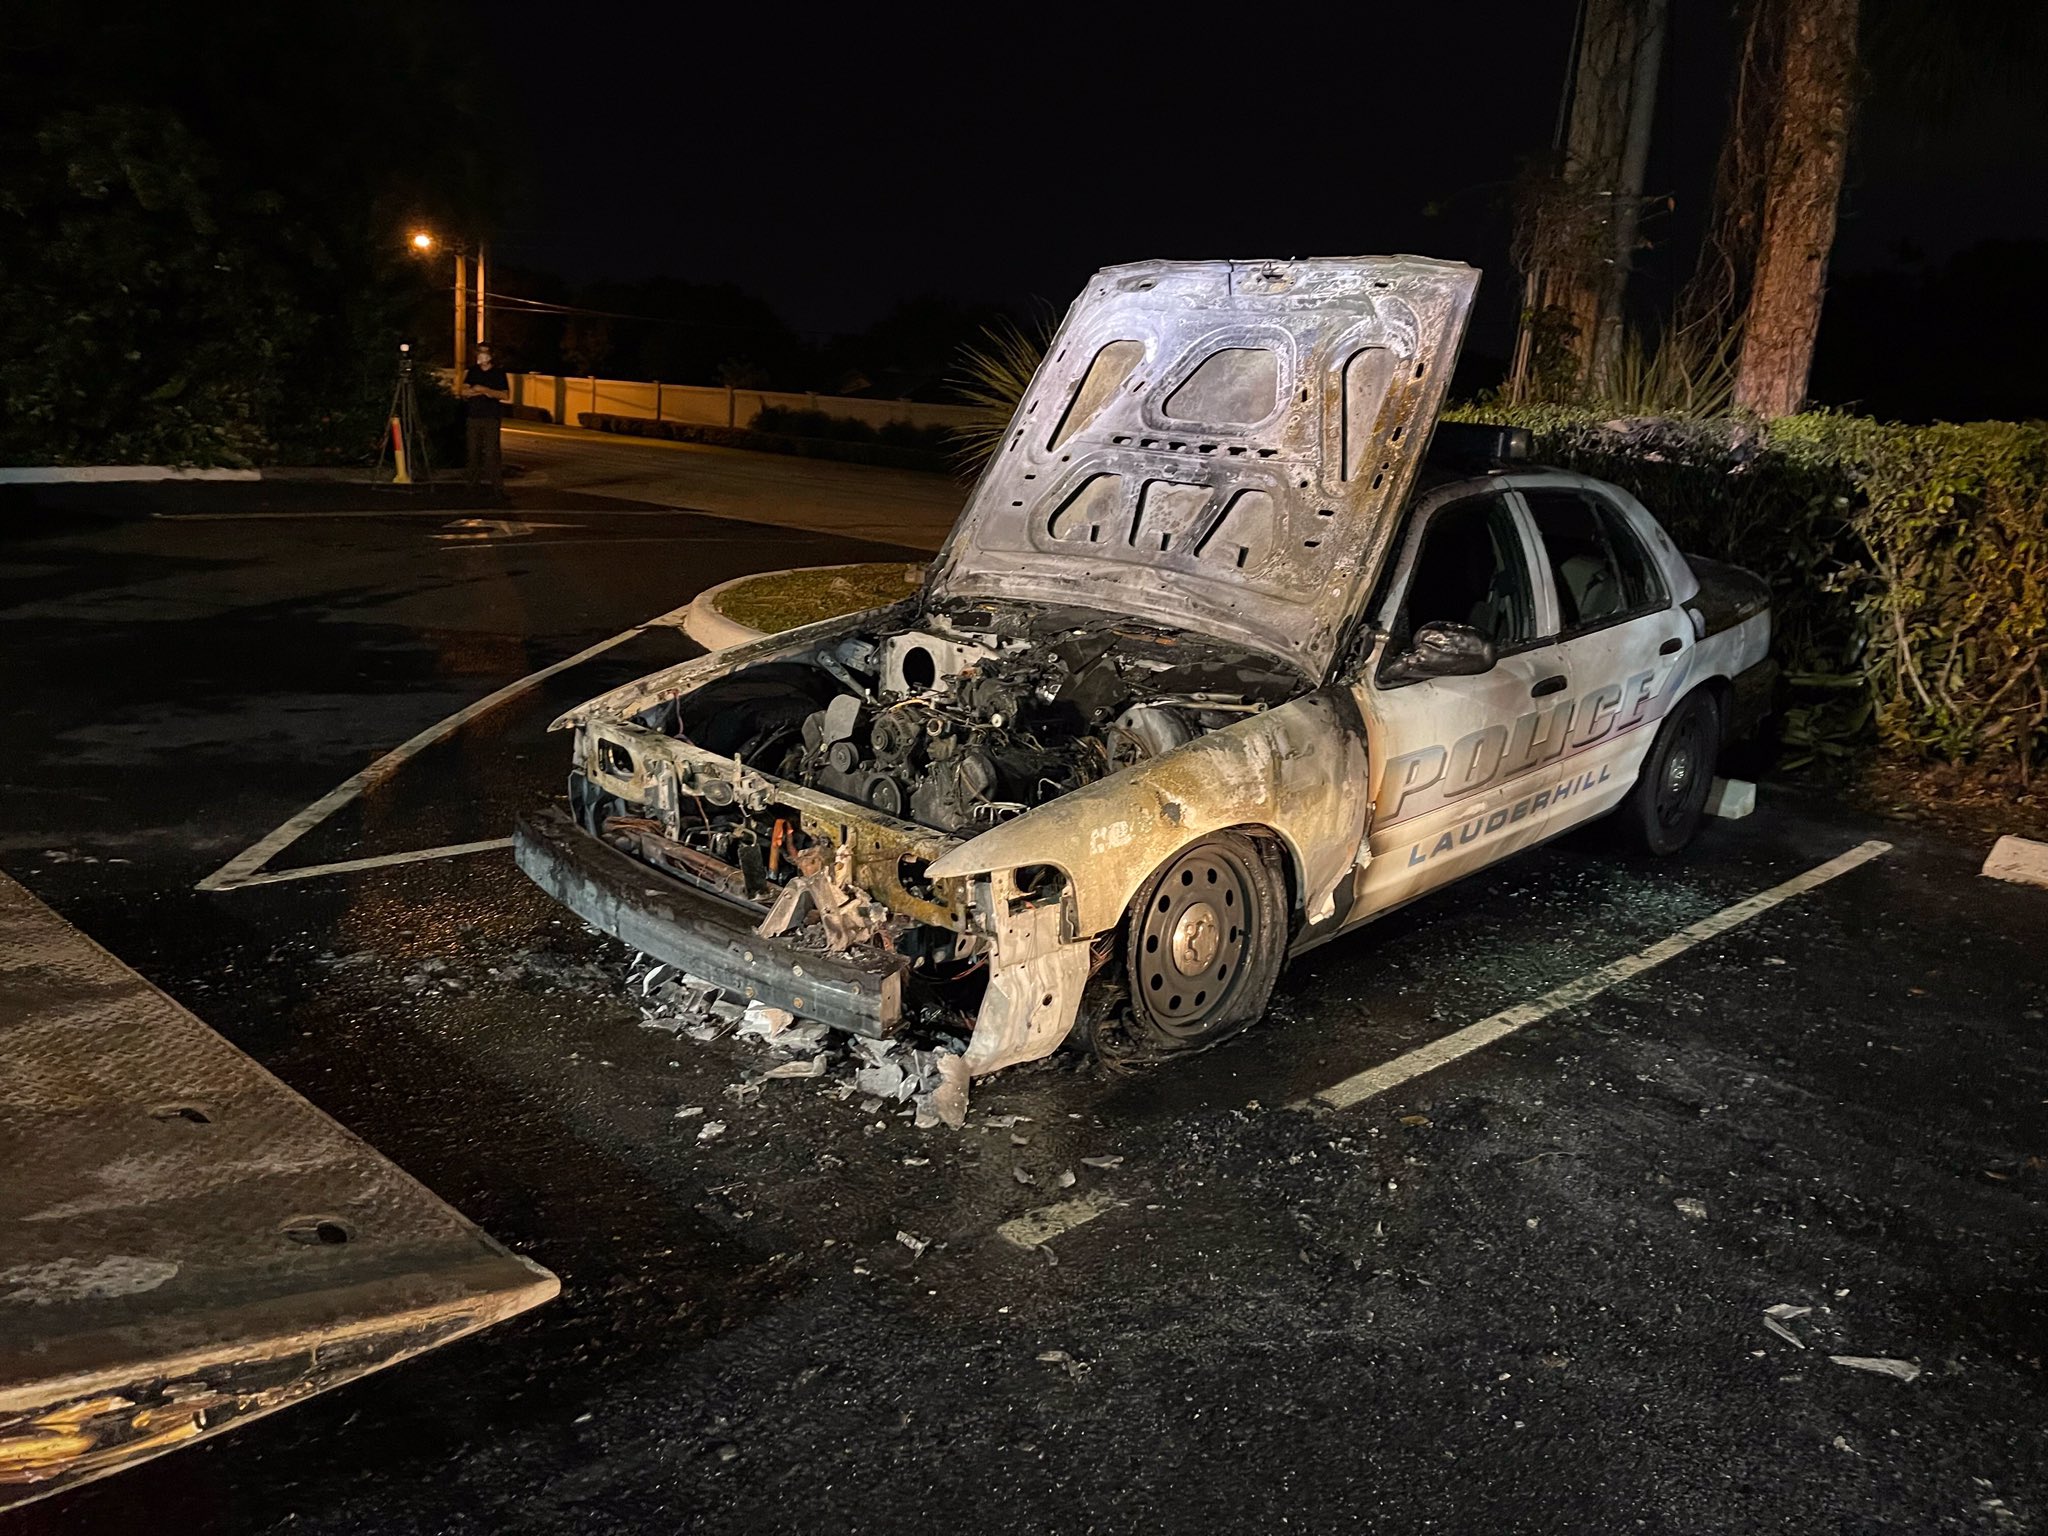 Police Car Torched By Arsonist Outside Lauderhill Synagogue